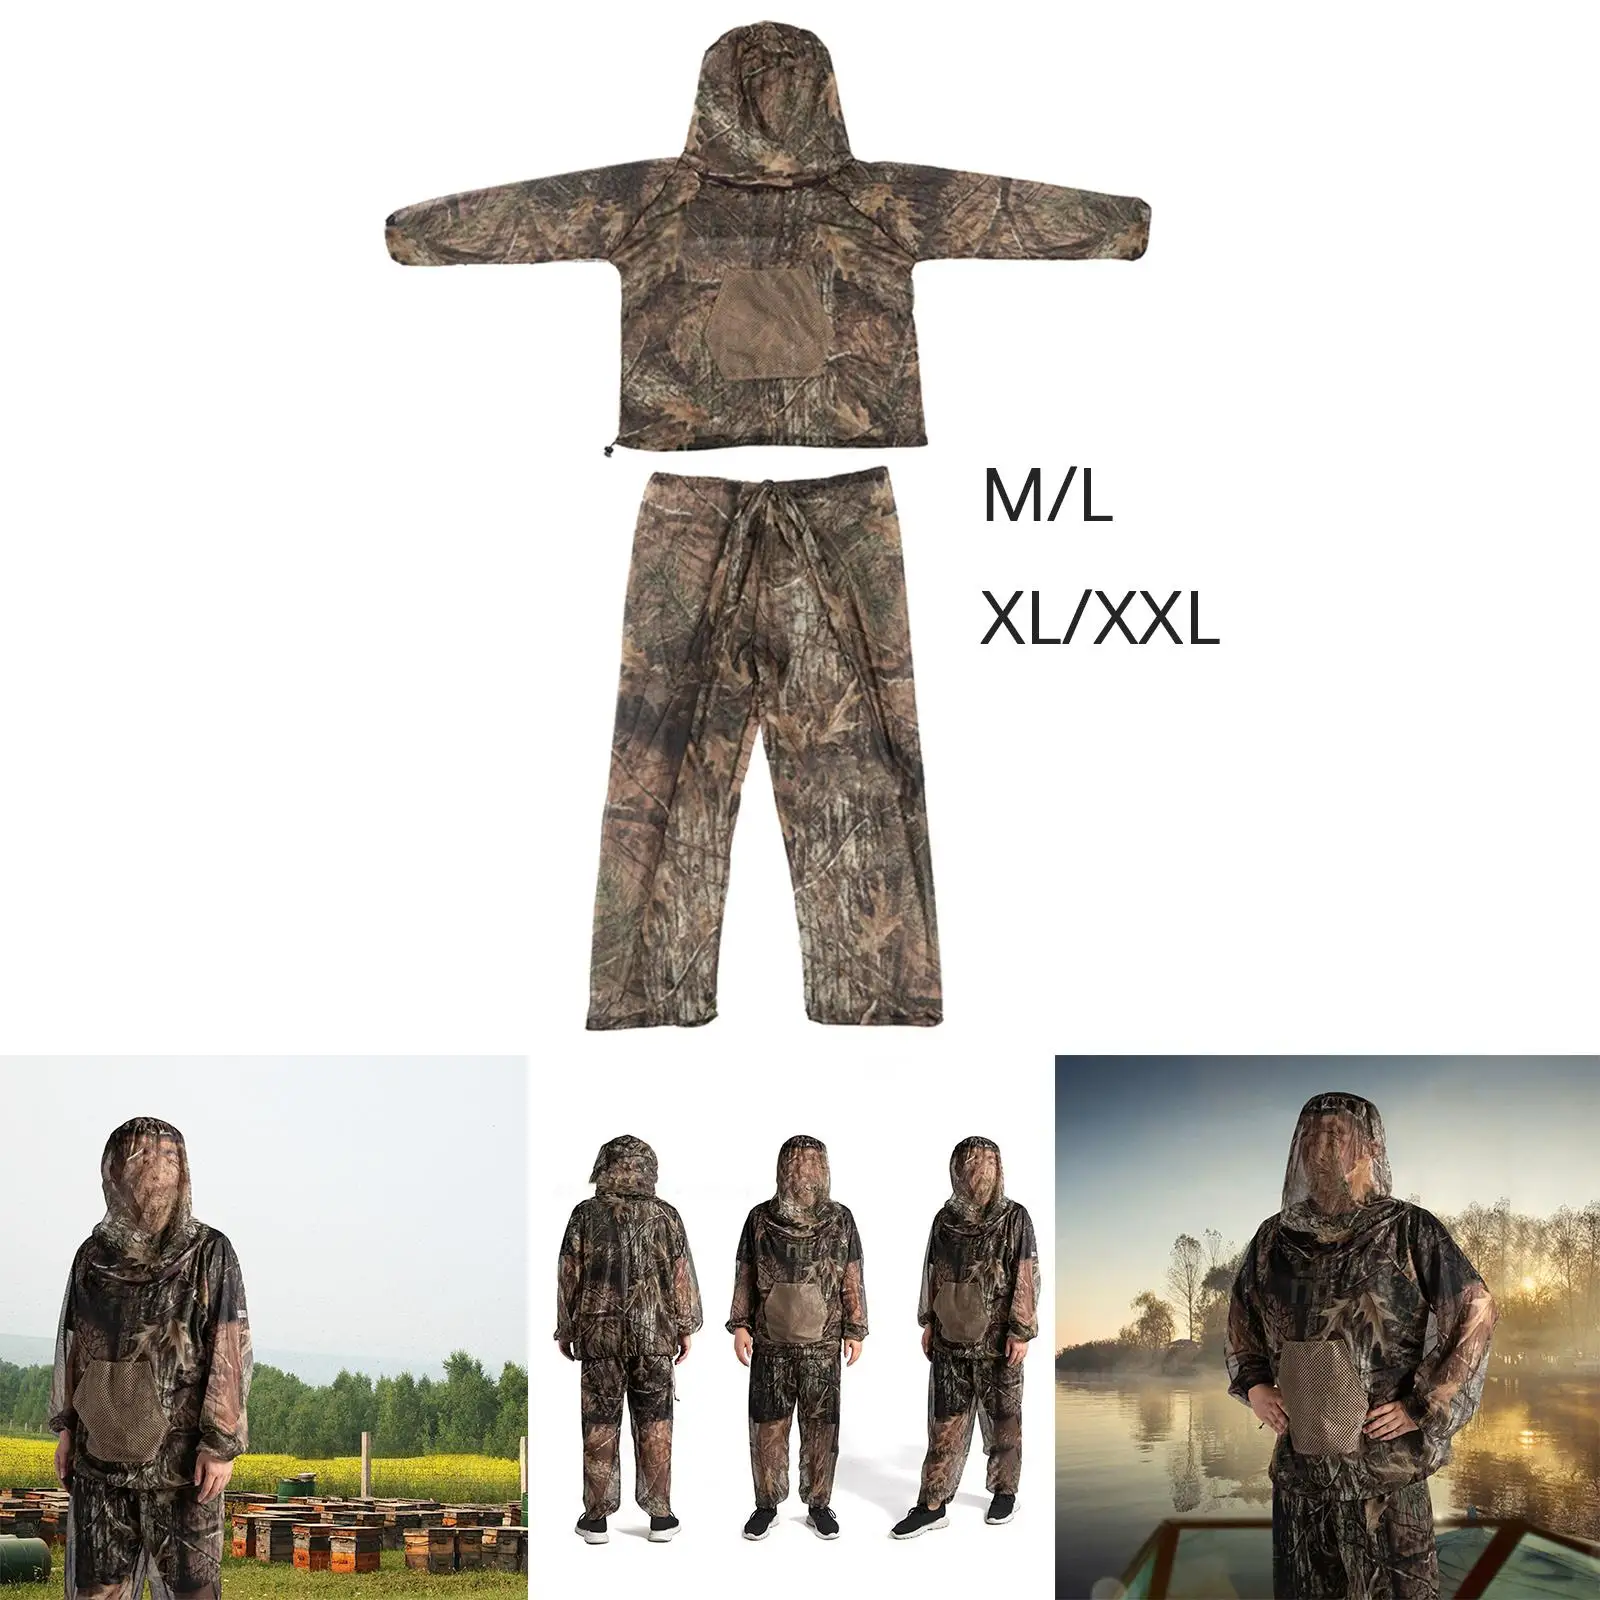 Mesh Hooded suits protection Summer Breathable for Camping Hunting